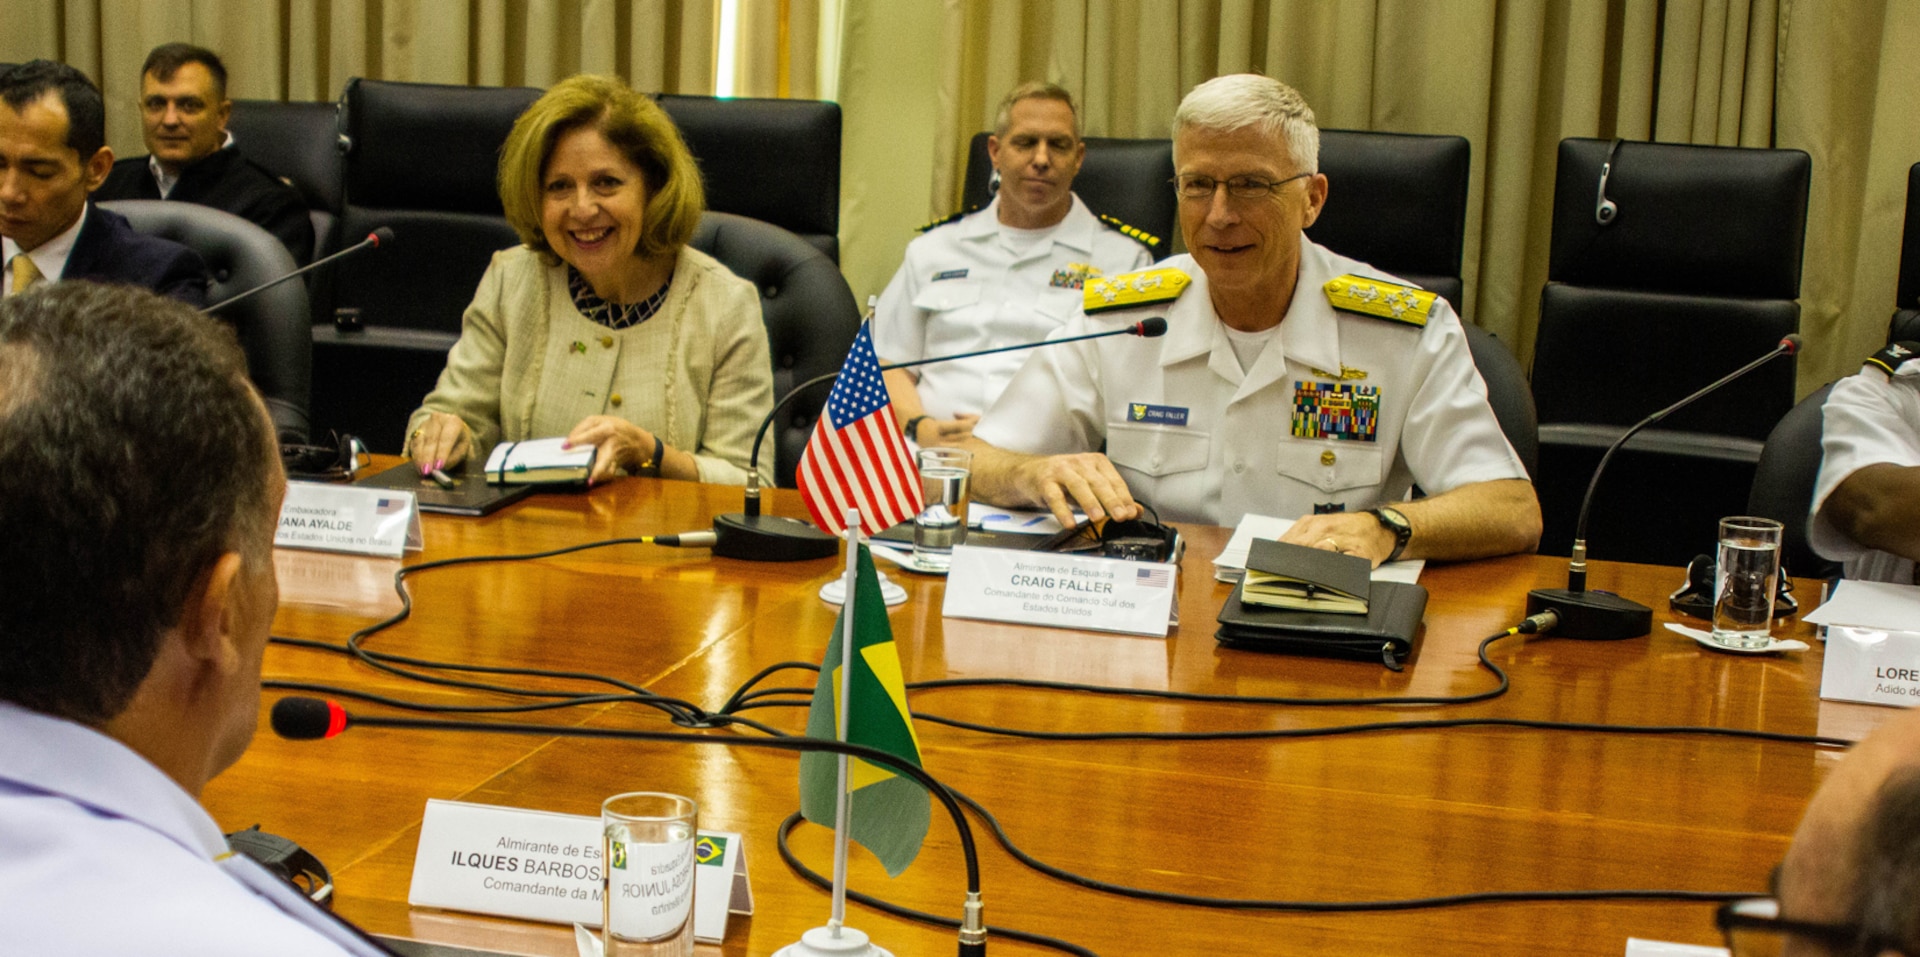 he commander of U.S. Southern Command, Navy Adm. Craig Faller, meets with Brazil's Chief of the Navy, Admiral Ilques Barbosa Júnior, in Brazil Feb. 11, 2019.